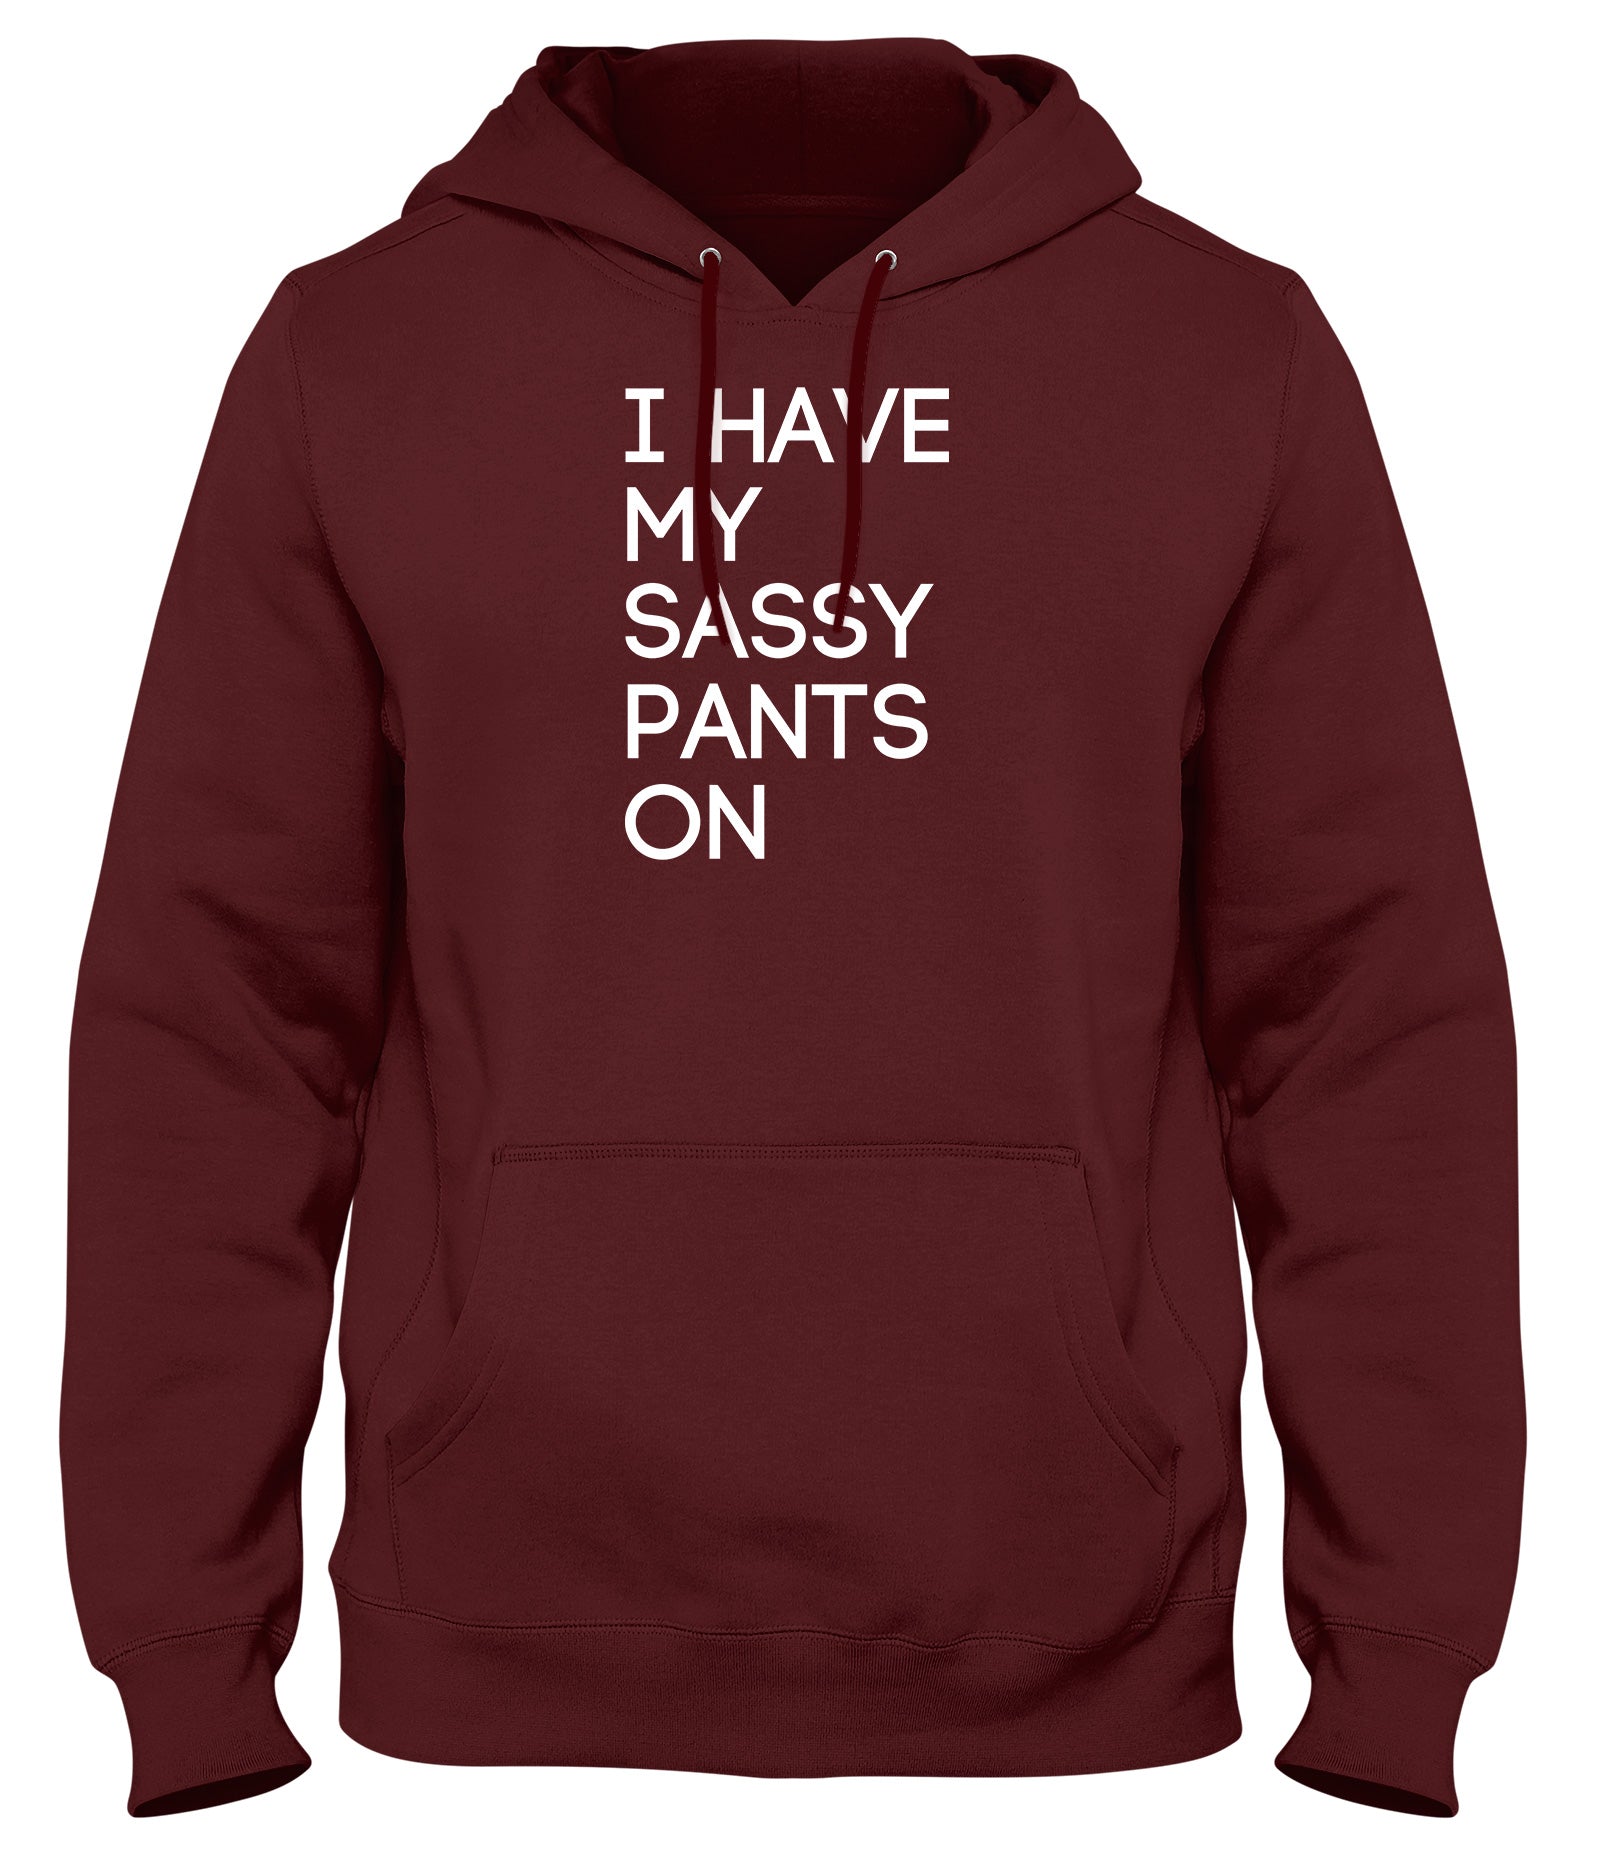 I HAVE MY SASSY PANTS ON MENS WOMENS UNISEX FUNNY HOODIE